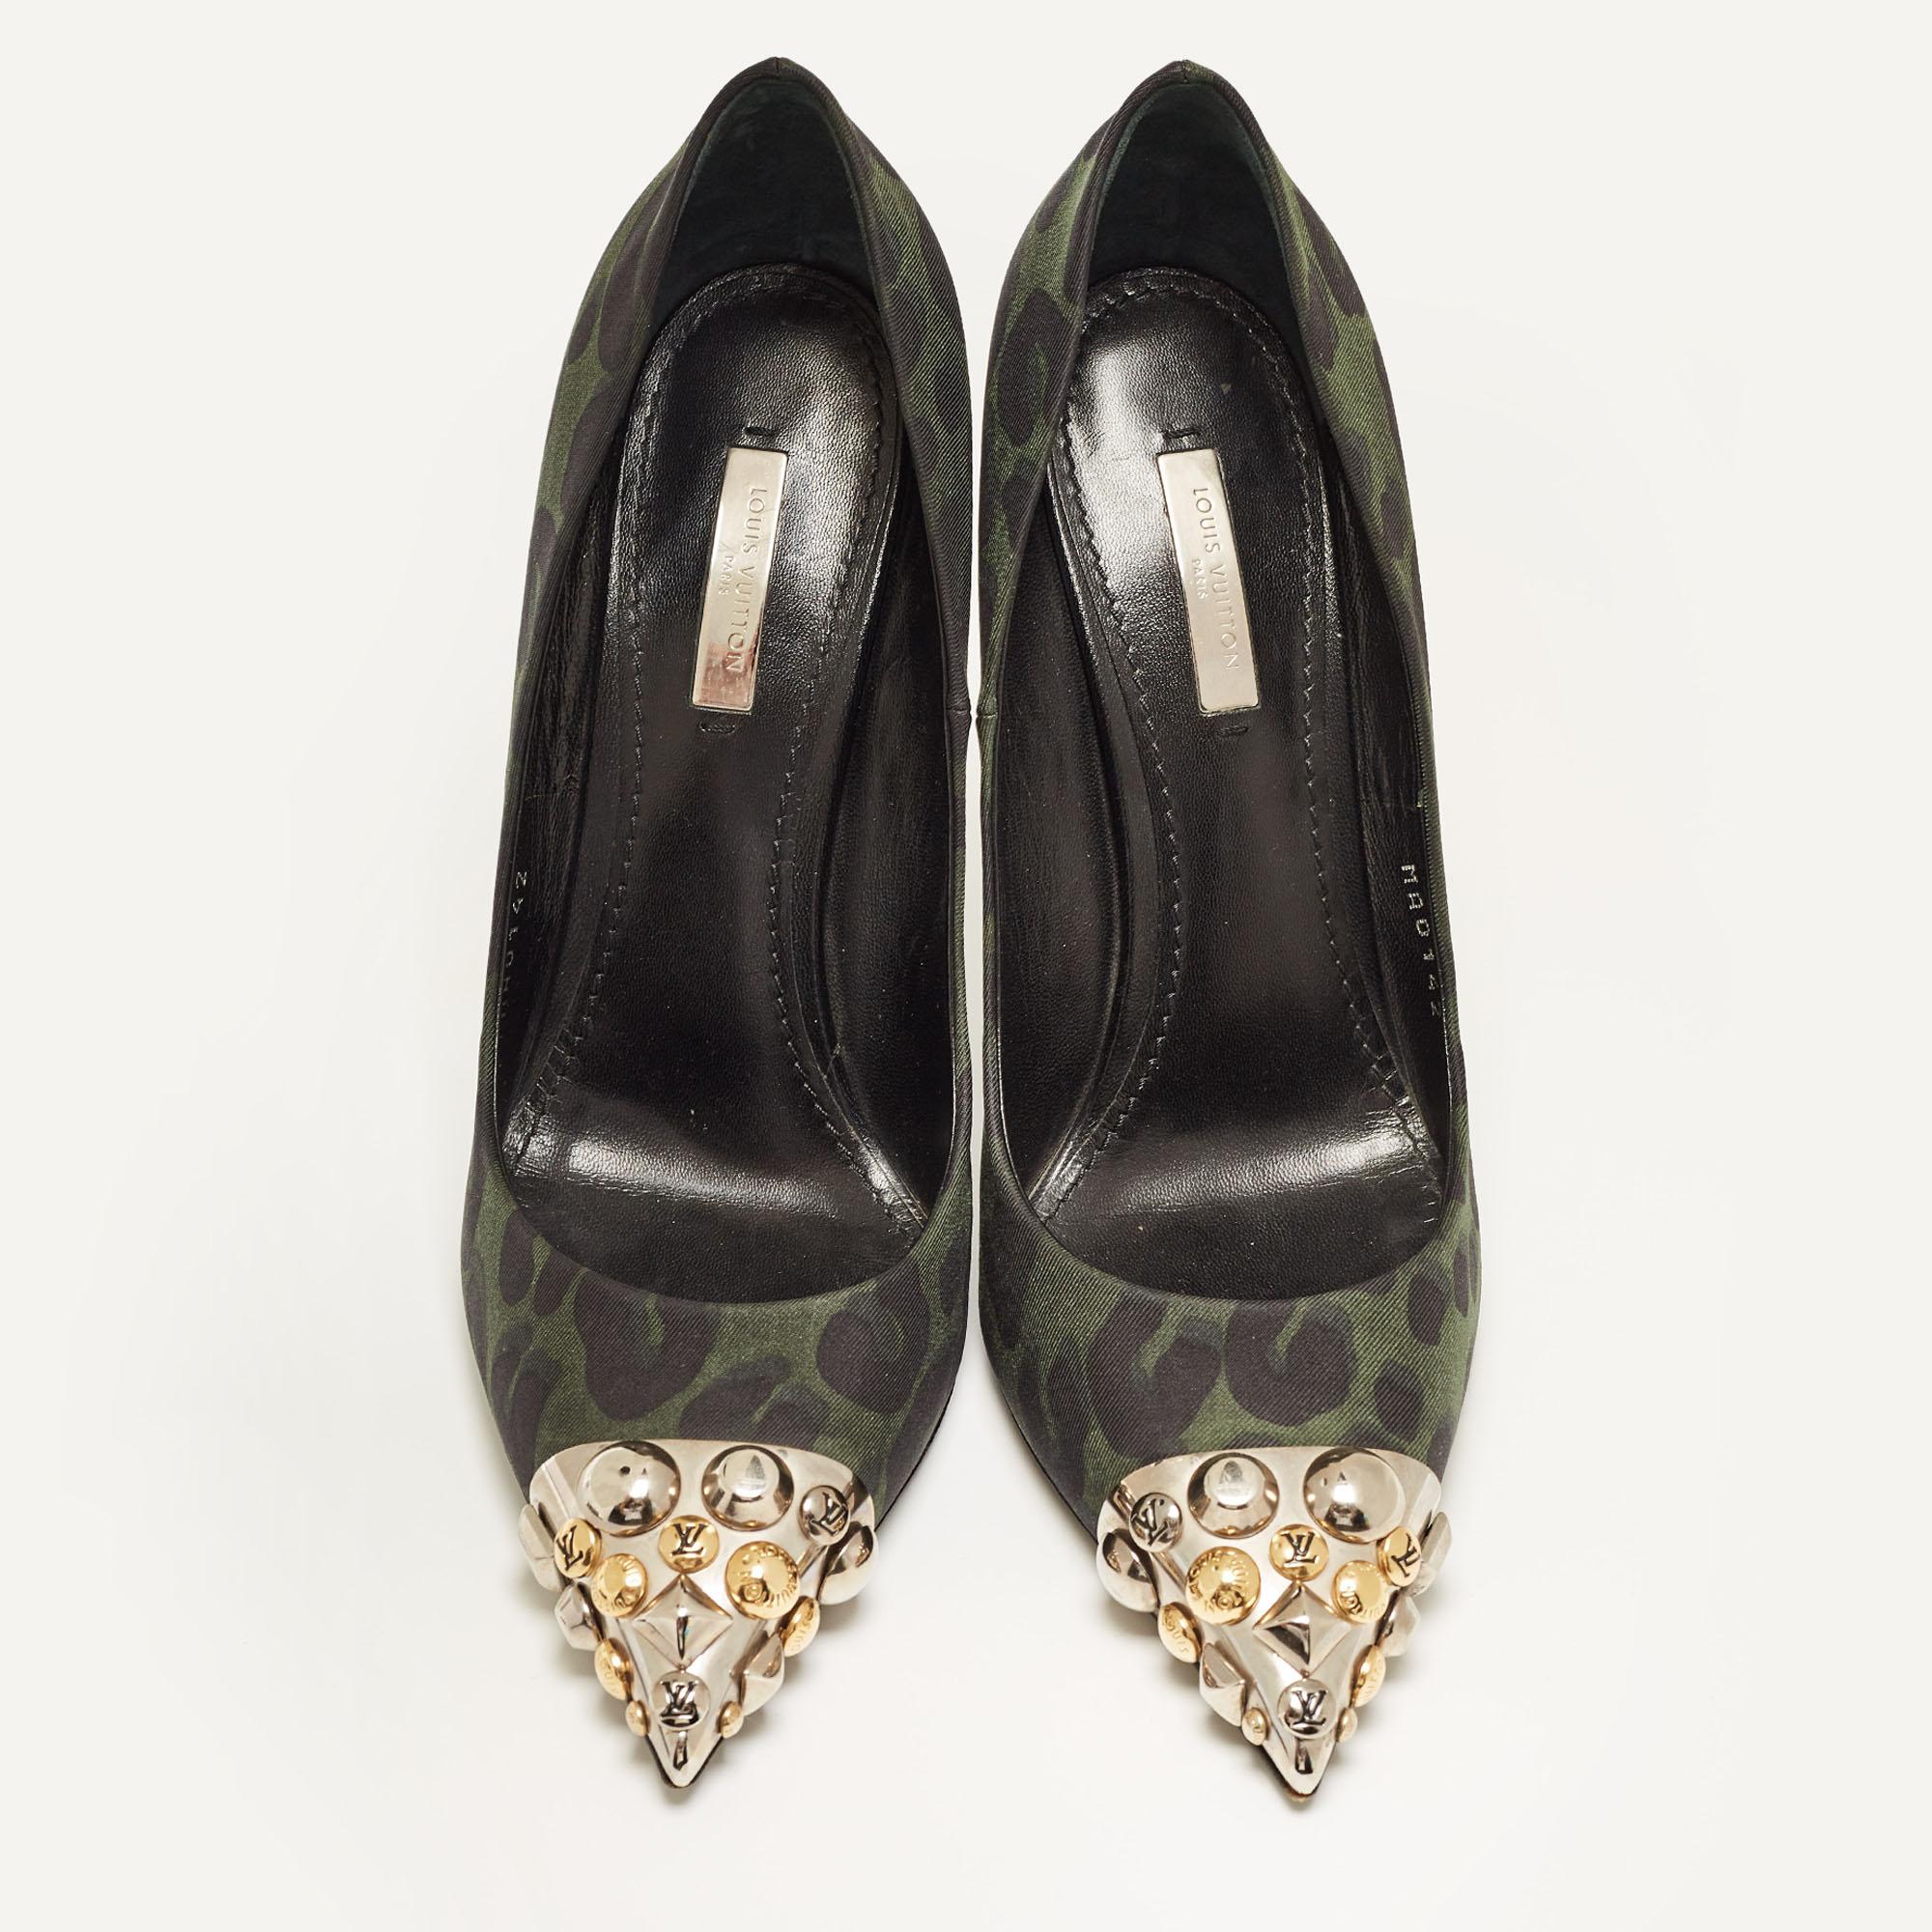 The fashion house’s tradition of excellence, coupled with modern design sensibilities, works to make these LV pumps a fabulous choice. They'll help you deliver a chic look with ease.

